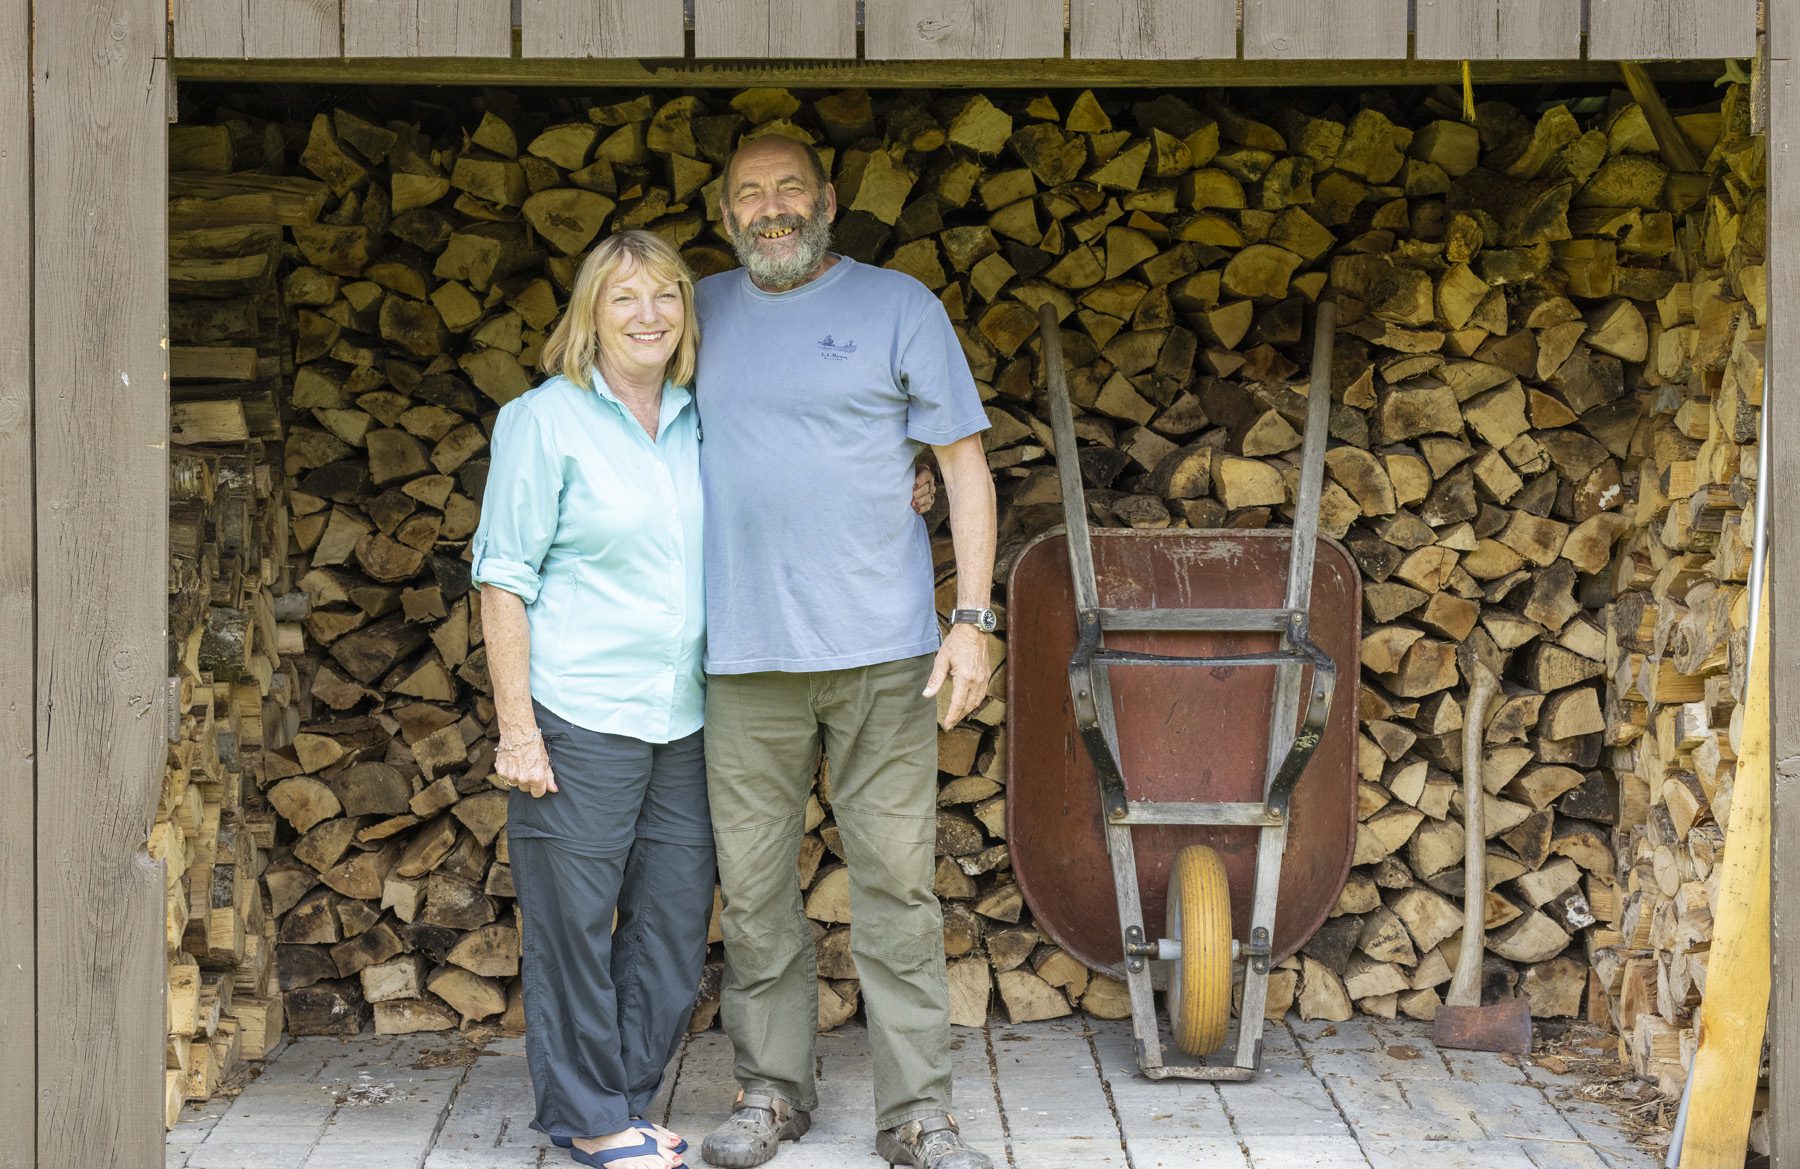 Rodney Morgan and Donna Kagiliery rely heavily on firewood to heat their home